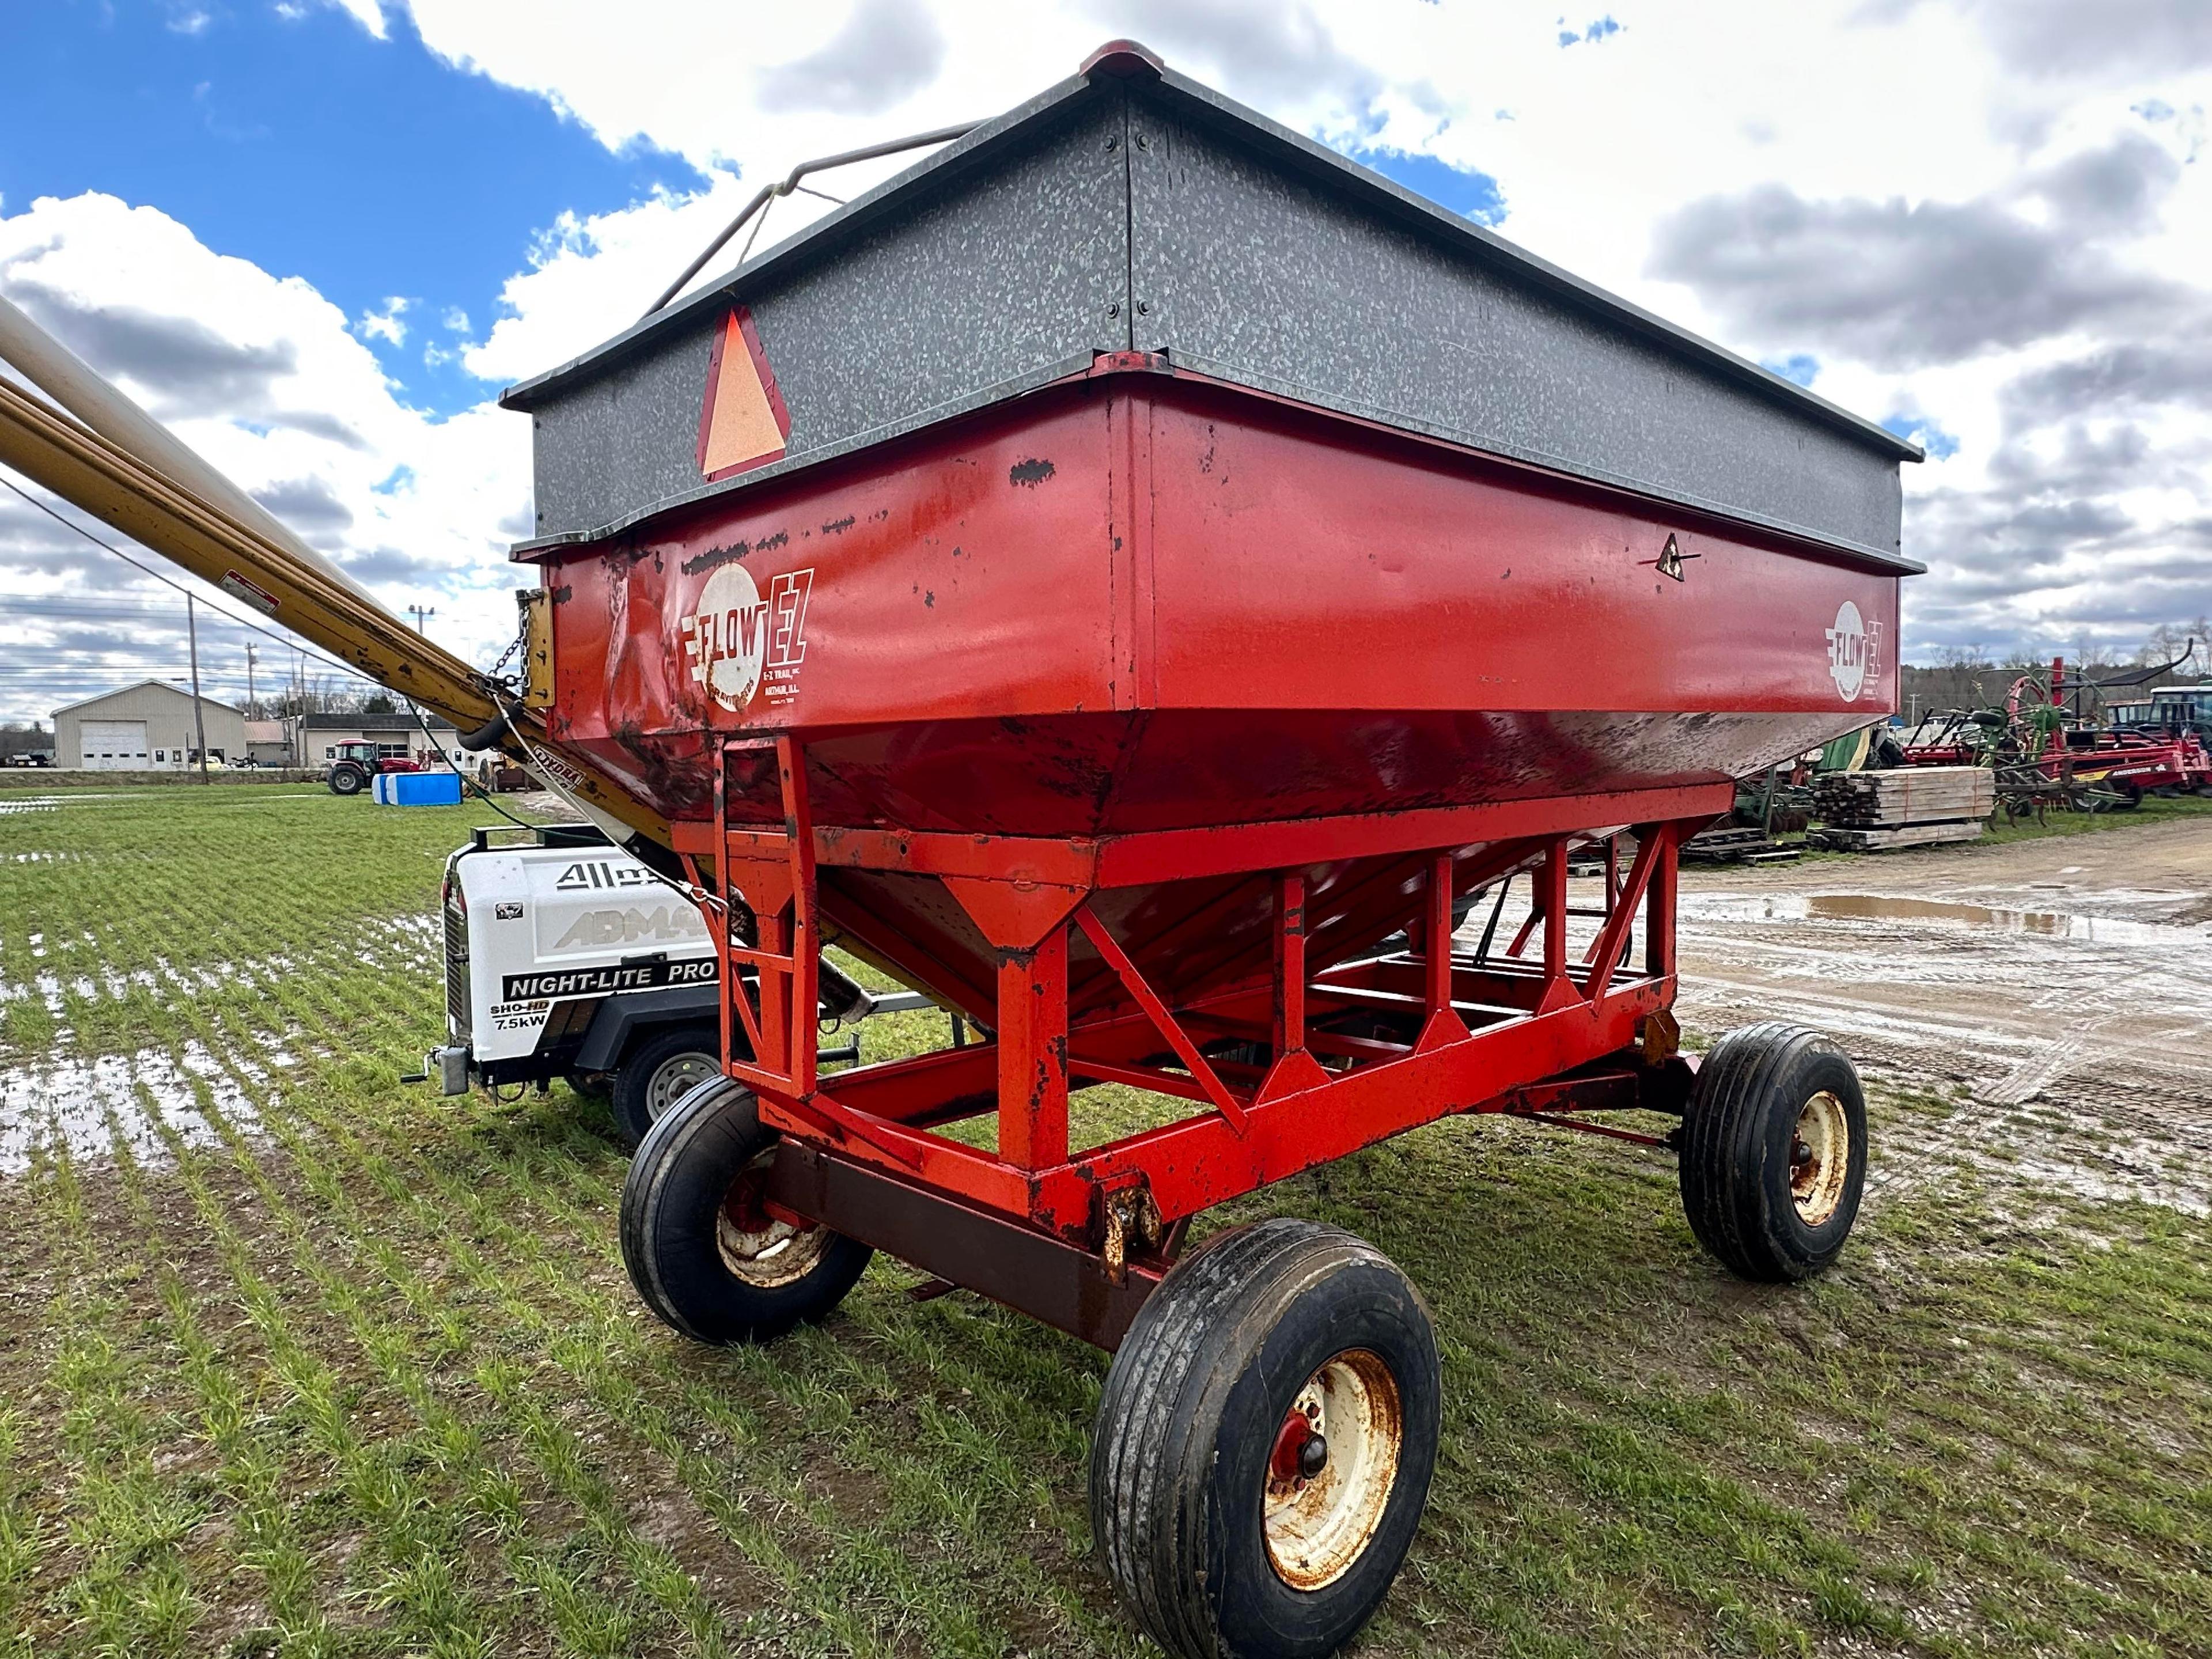 EZ-Trail Model 300 Gravity Box With 10 Ton Gear, Hydra Fold 14’ Auger Used For Seed